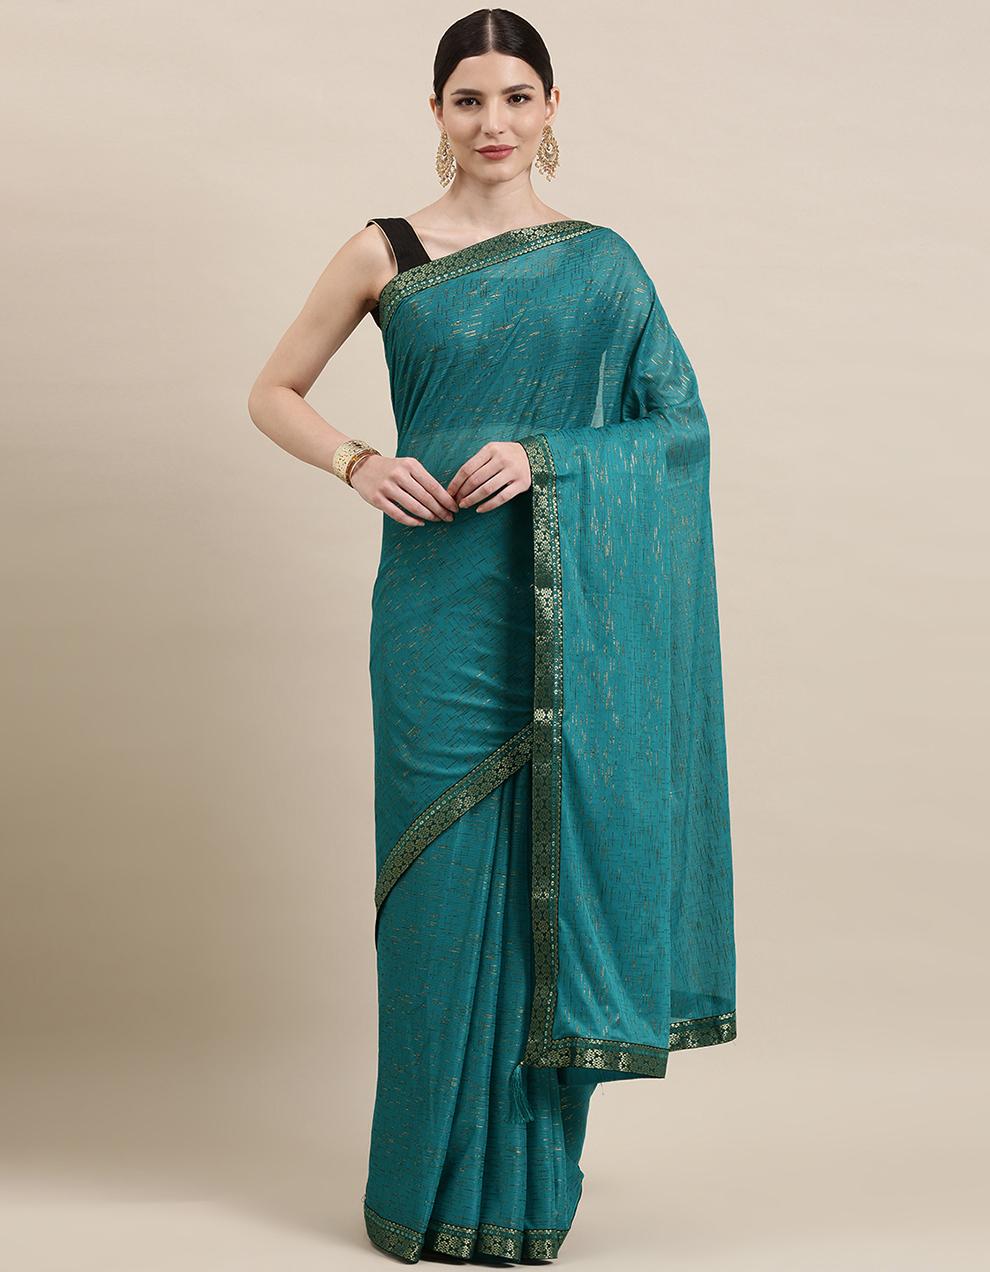 Teal Blue Imported Fabric Saree With Blouse IW26560